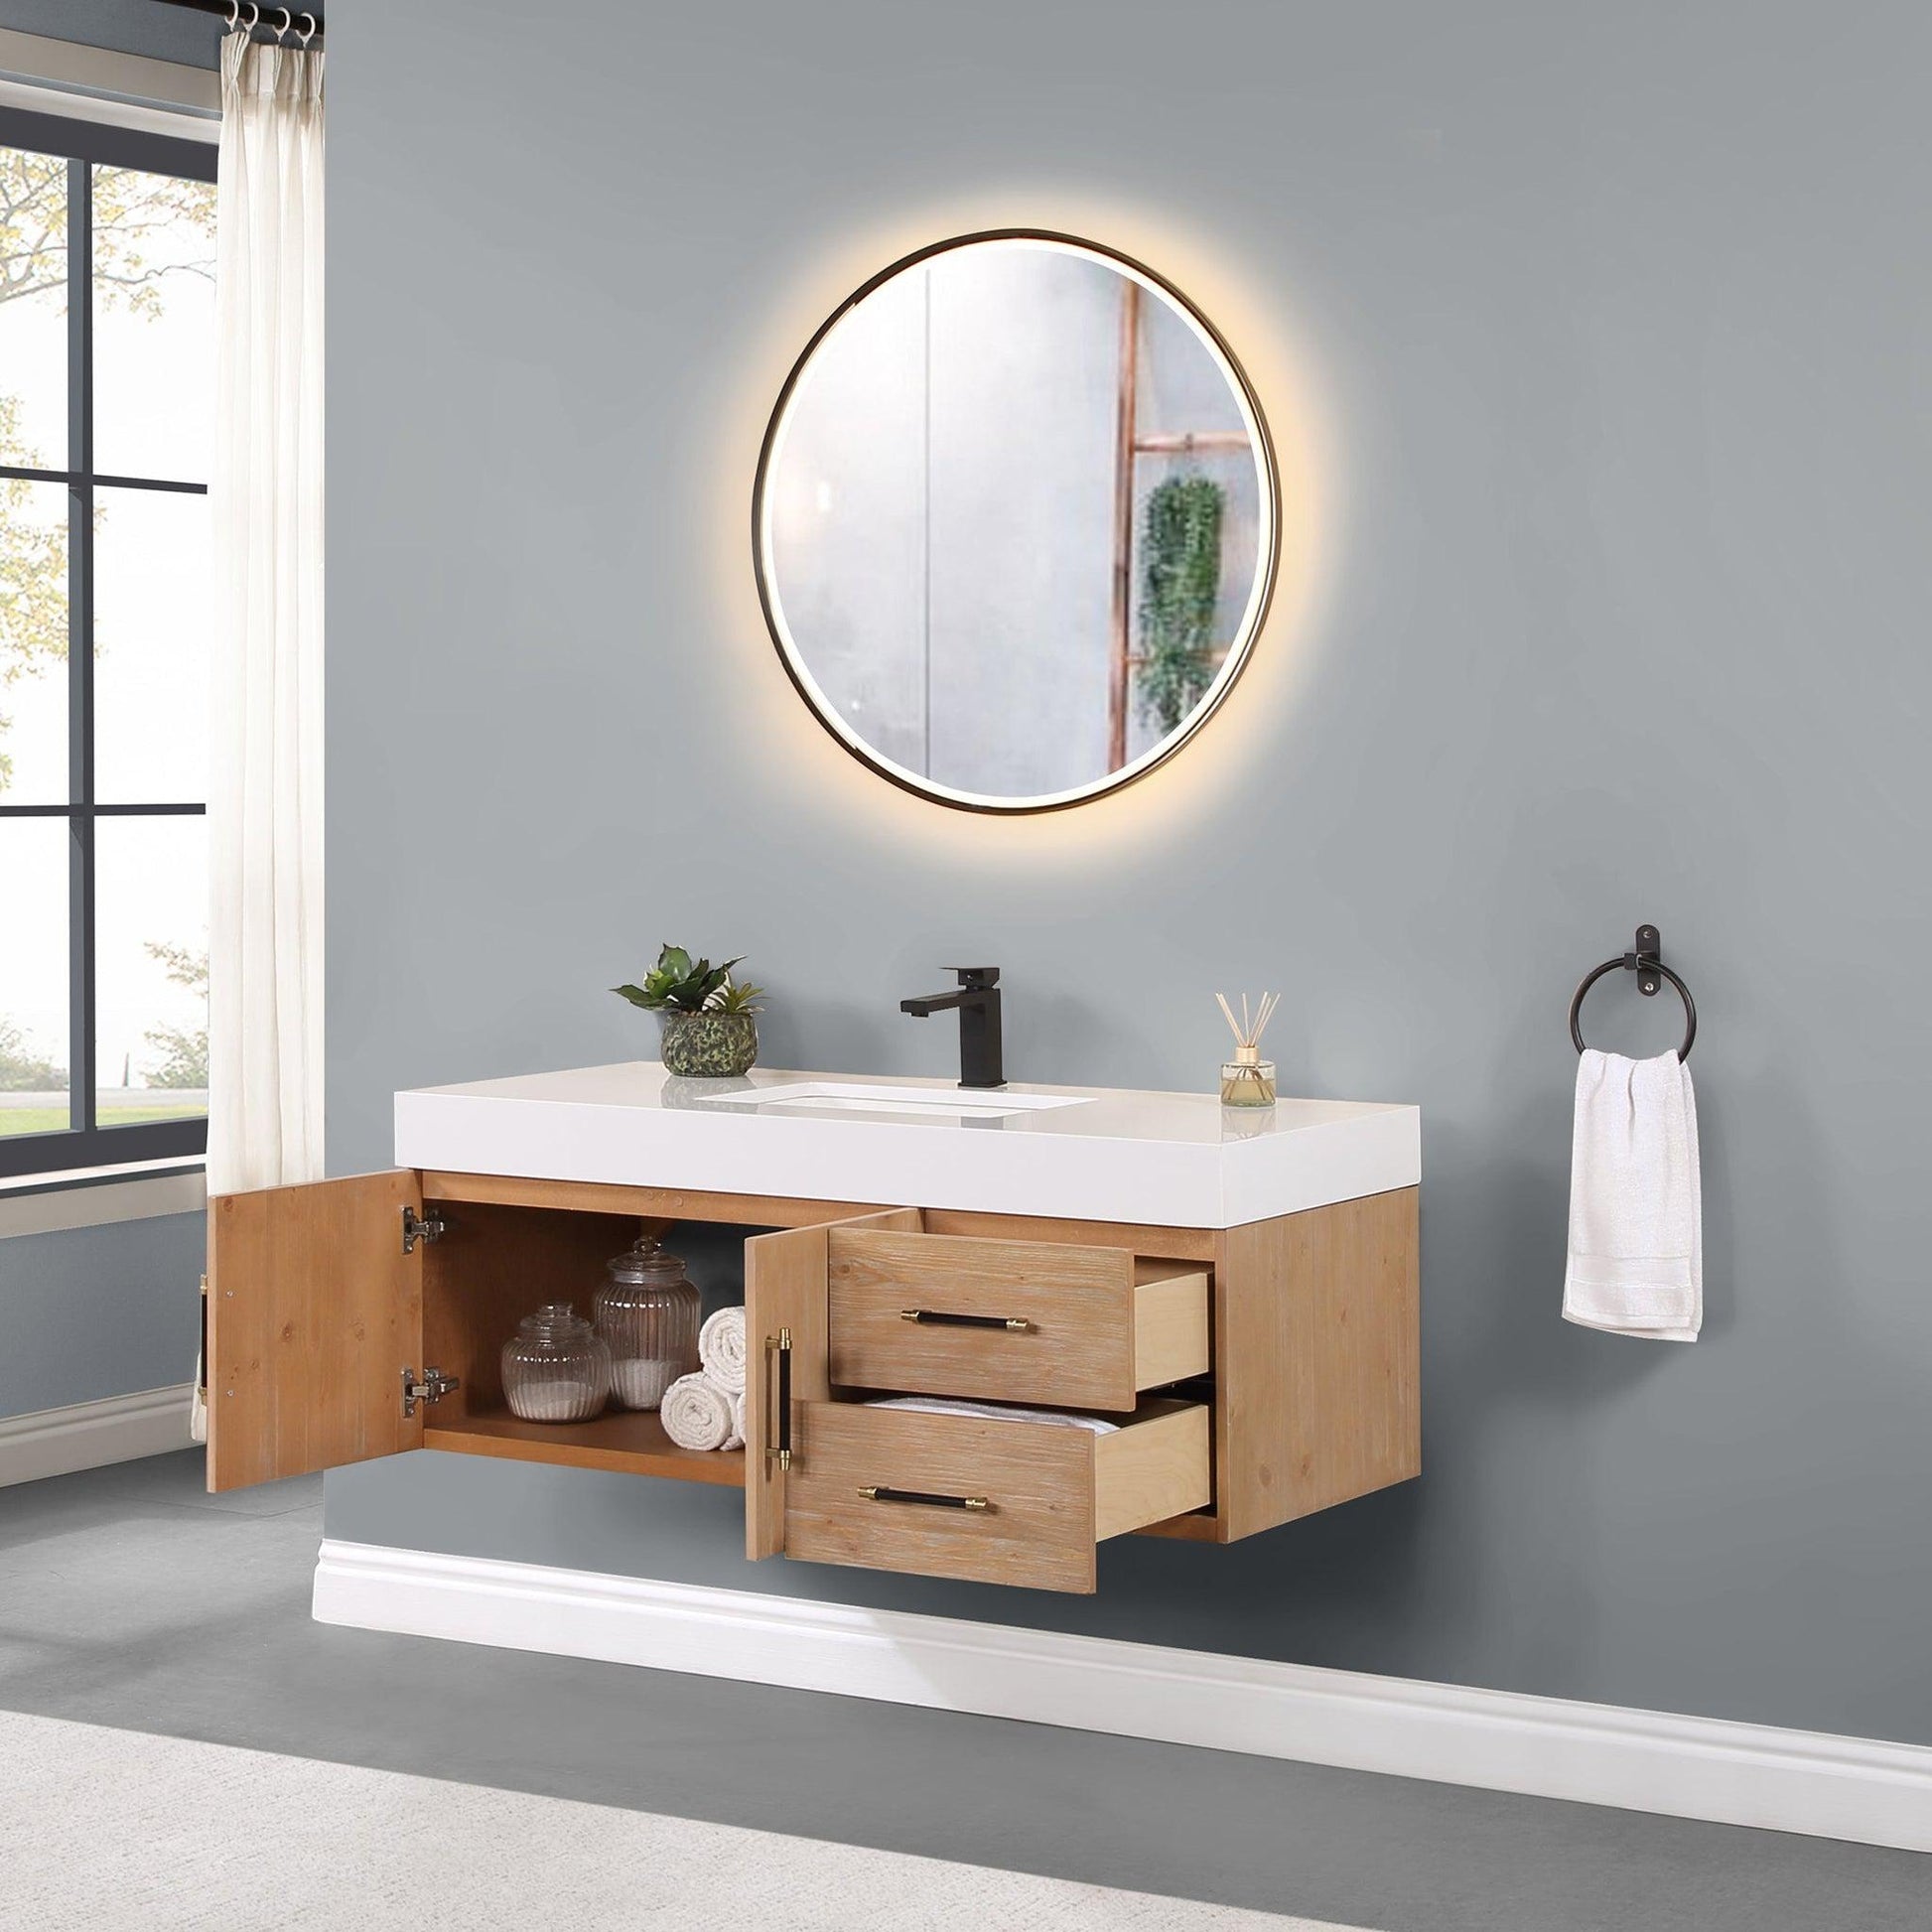 Altair Corchia 48" Light Brown Wall-Mounted Single Bathroom Vanity Set With Mirror, White Composite Stone Top, Single Rectangular Undermount Ceramic Sink, and Overflow